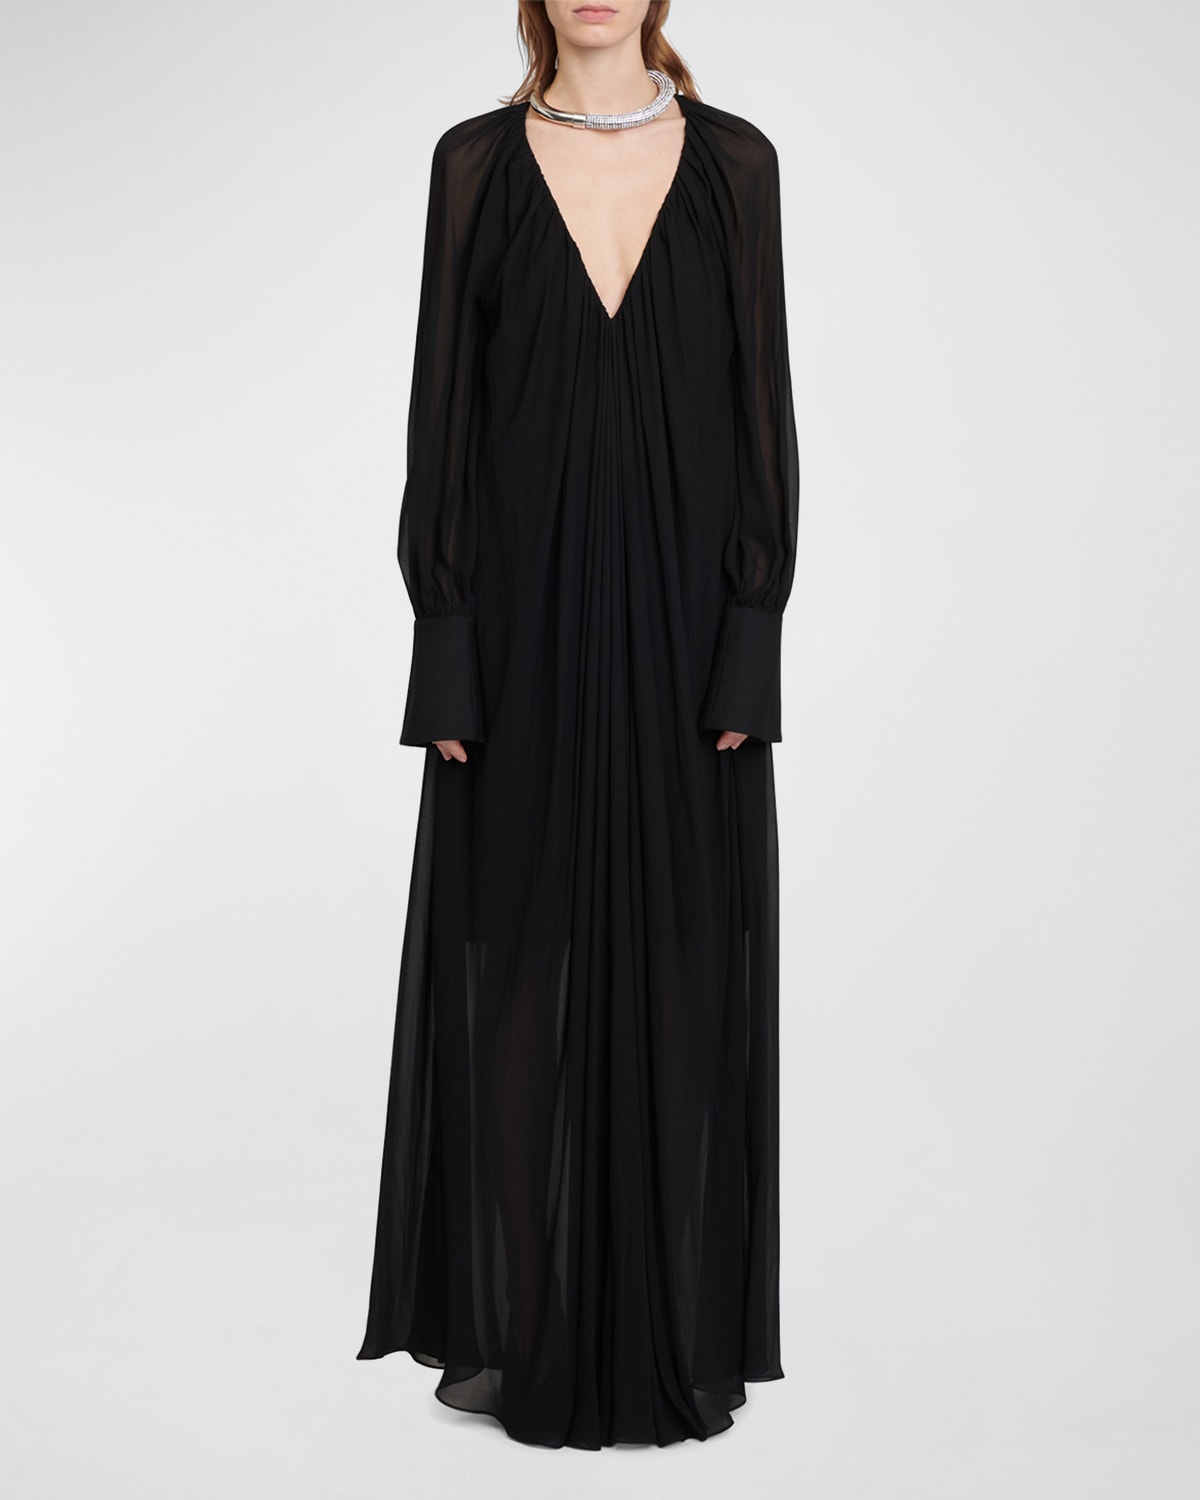 Maison Rabih Kayrouz Plunging Gathered Georgette Gown